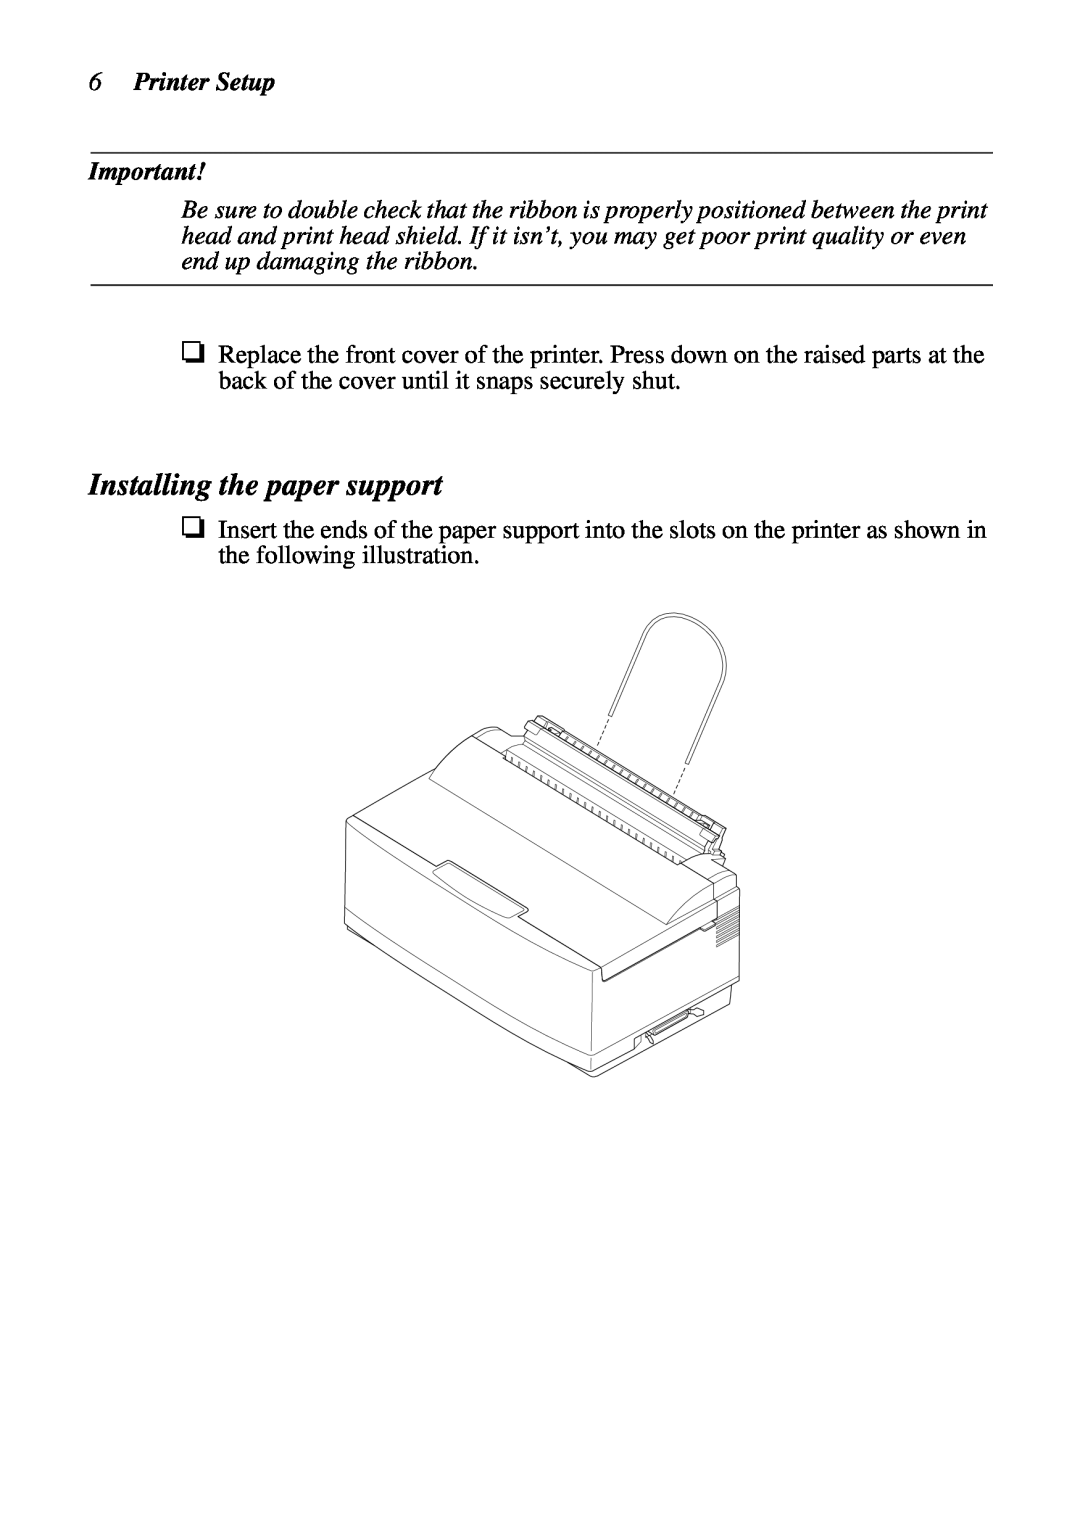 Star Micronics LC-90 NX-1010 user manual Installing the paper support, Printer Setup 